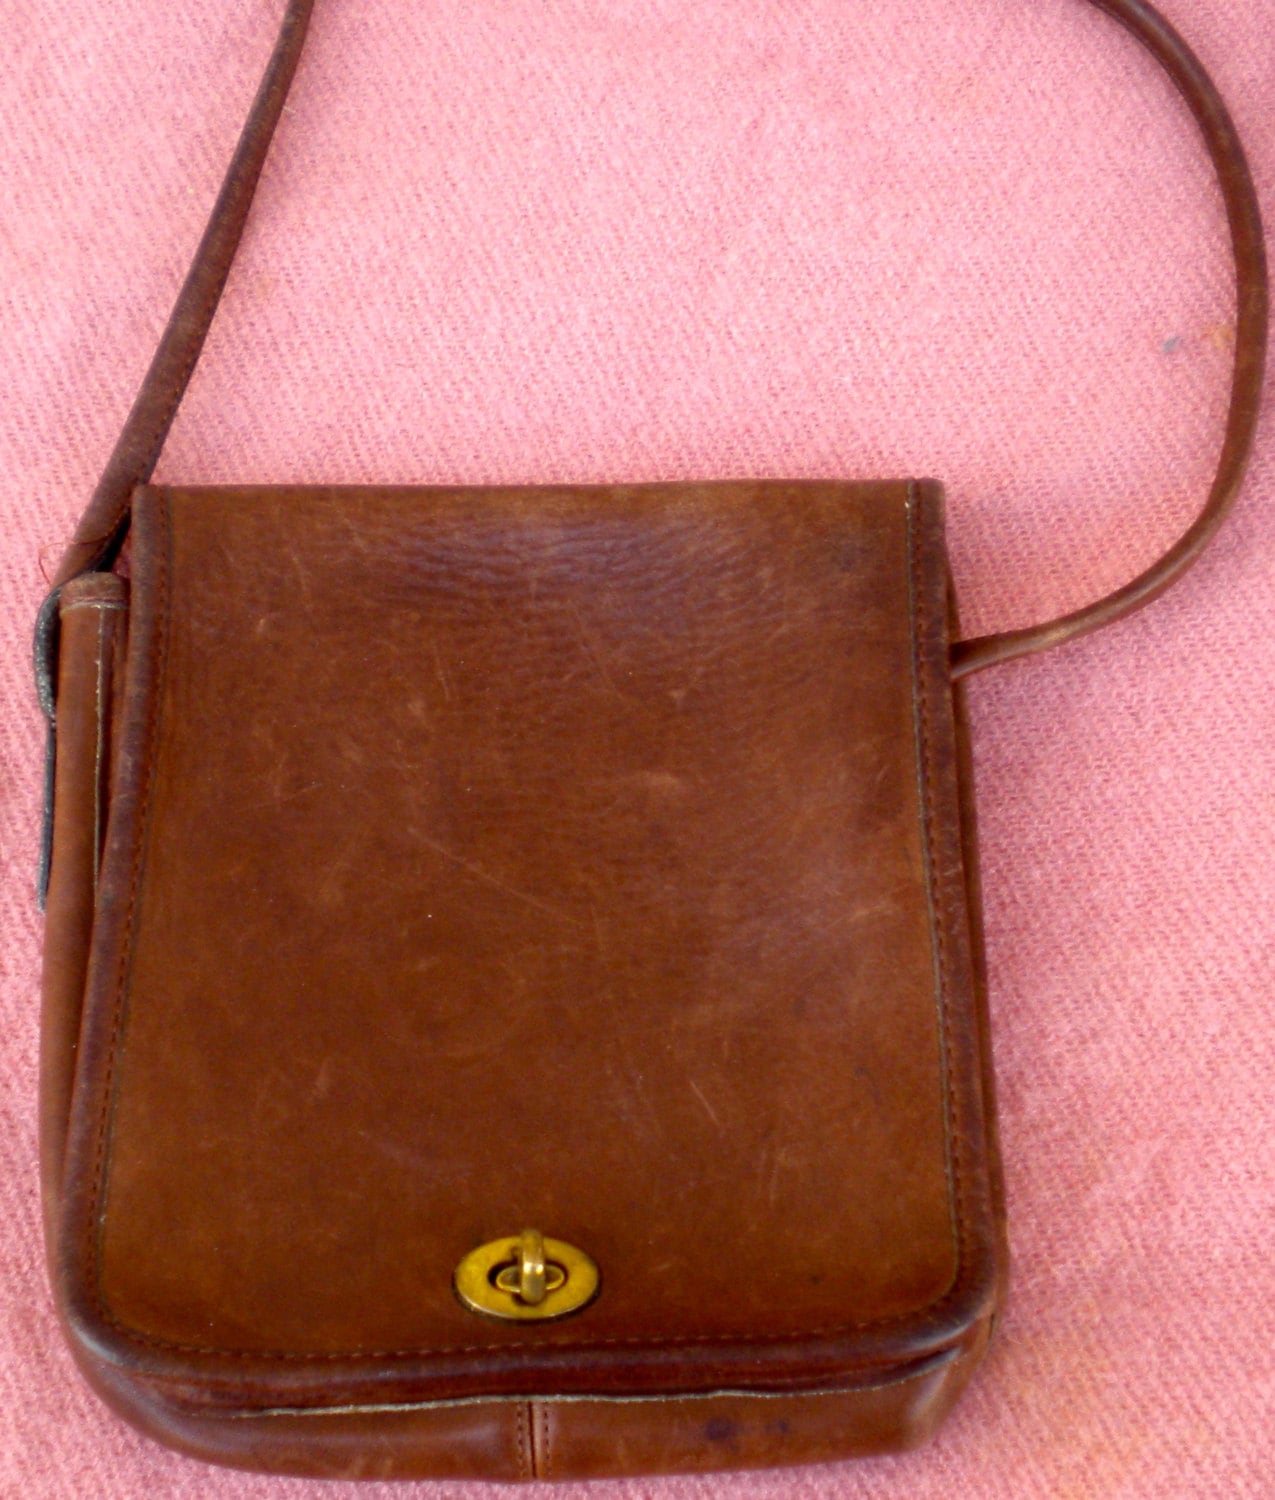 COACH Brand Vintage leather purse made in USA cross by Igotpolo